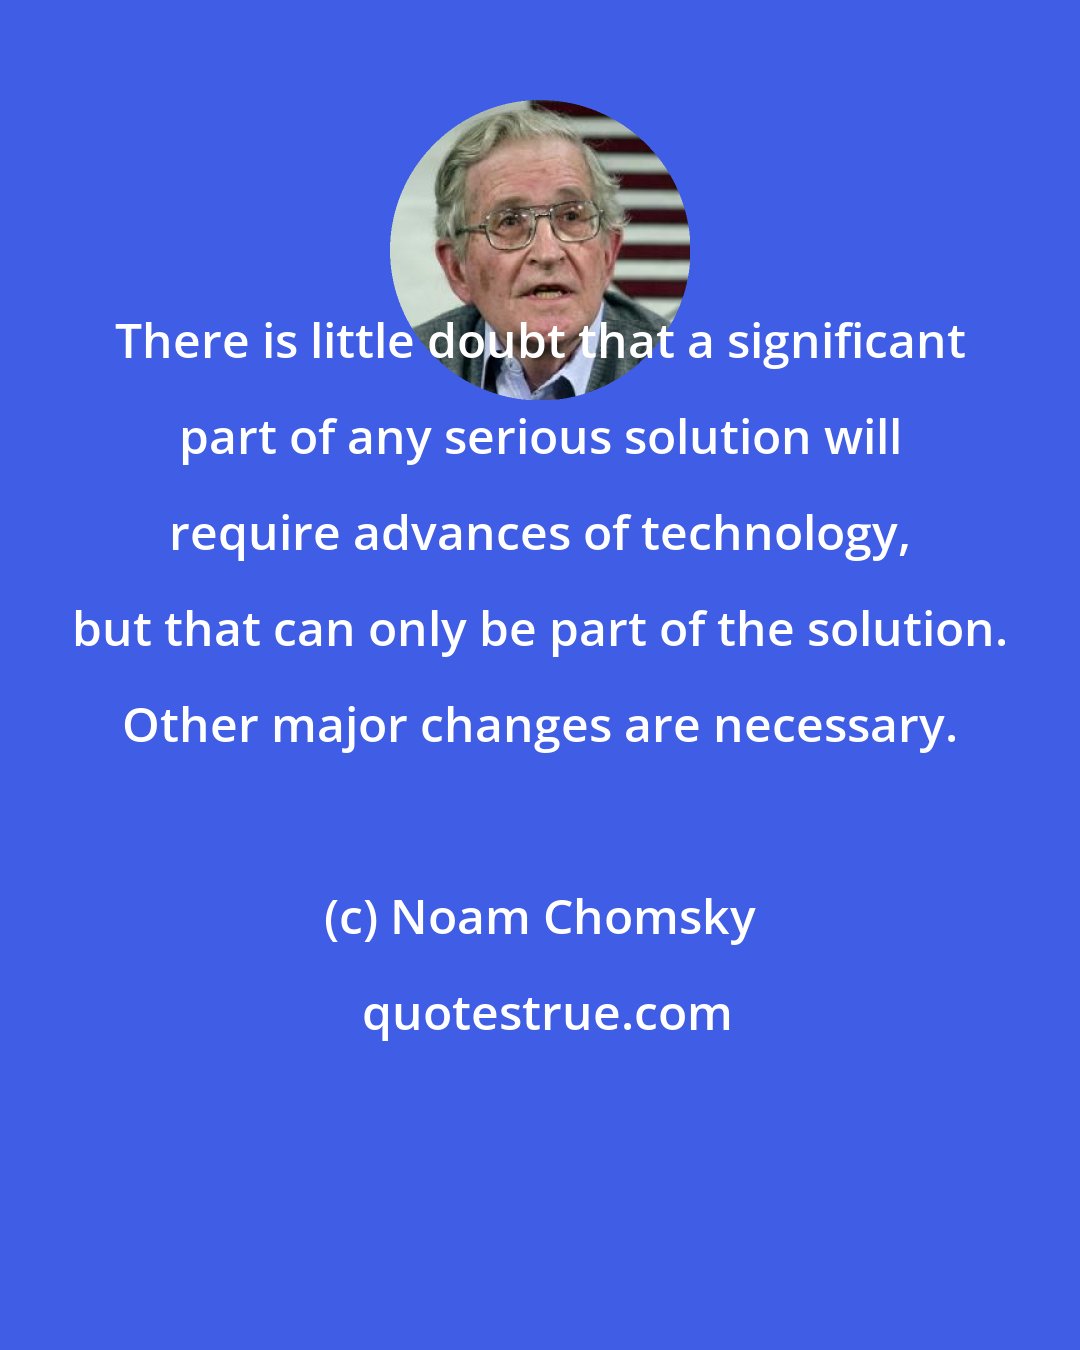 Noam Chomsky: There is little doubt that a significant part of any serious solution will require advances of technology, but that can only be part of the solution. Other major changes are necessary.